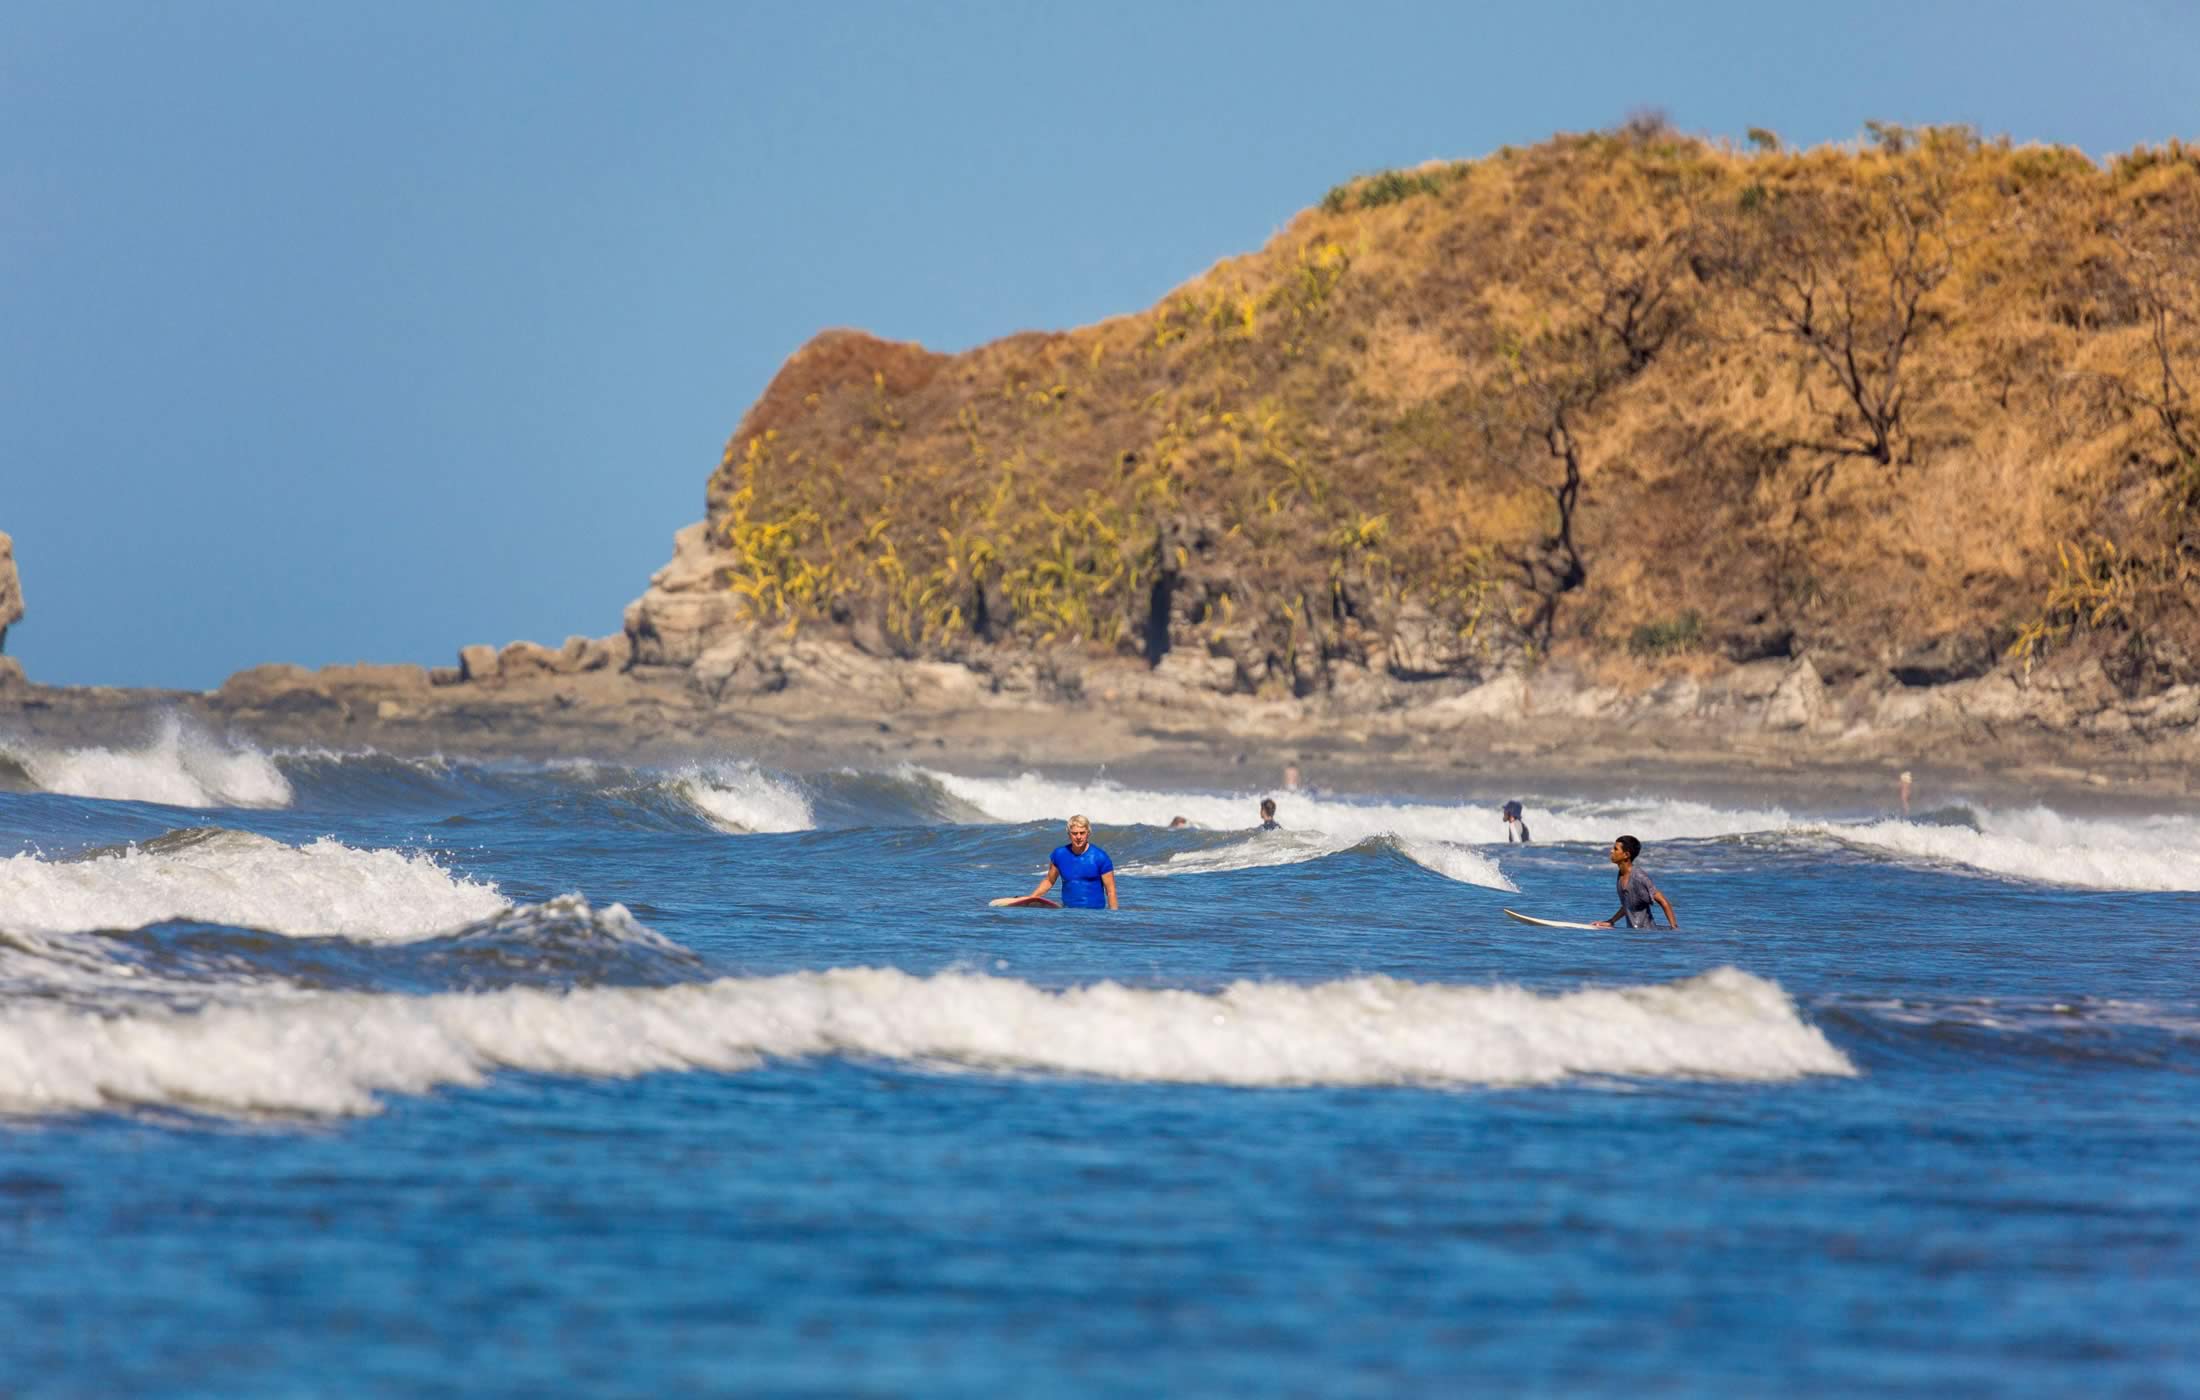 Photograph of several people surfing, as captured from the Mango Property Management website